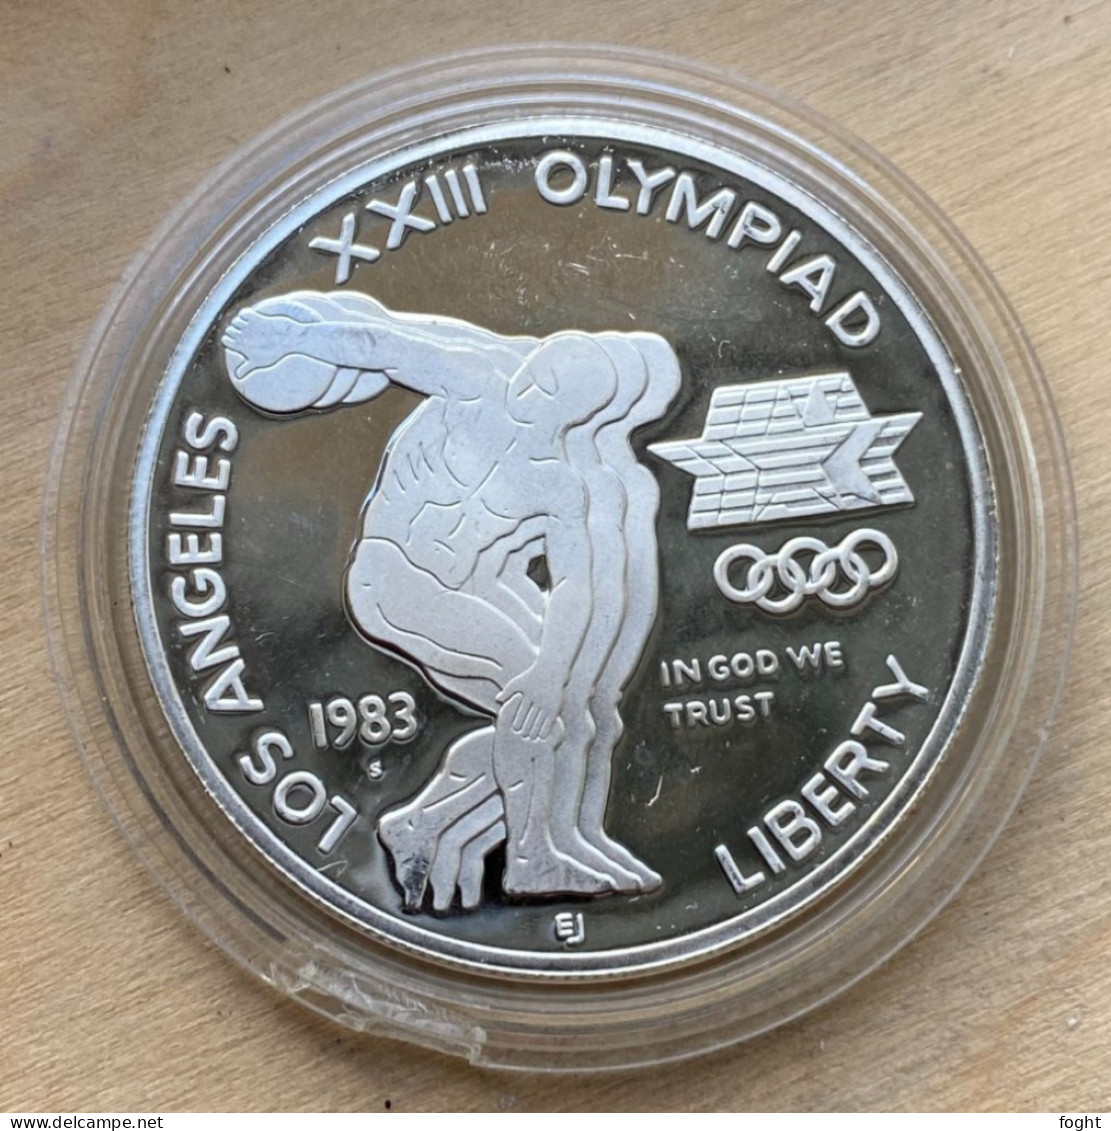 1983 S US .900 Silver Coin Los Angeles Olympics,PROOF,KM#209,6488 - Commemorative